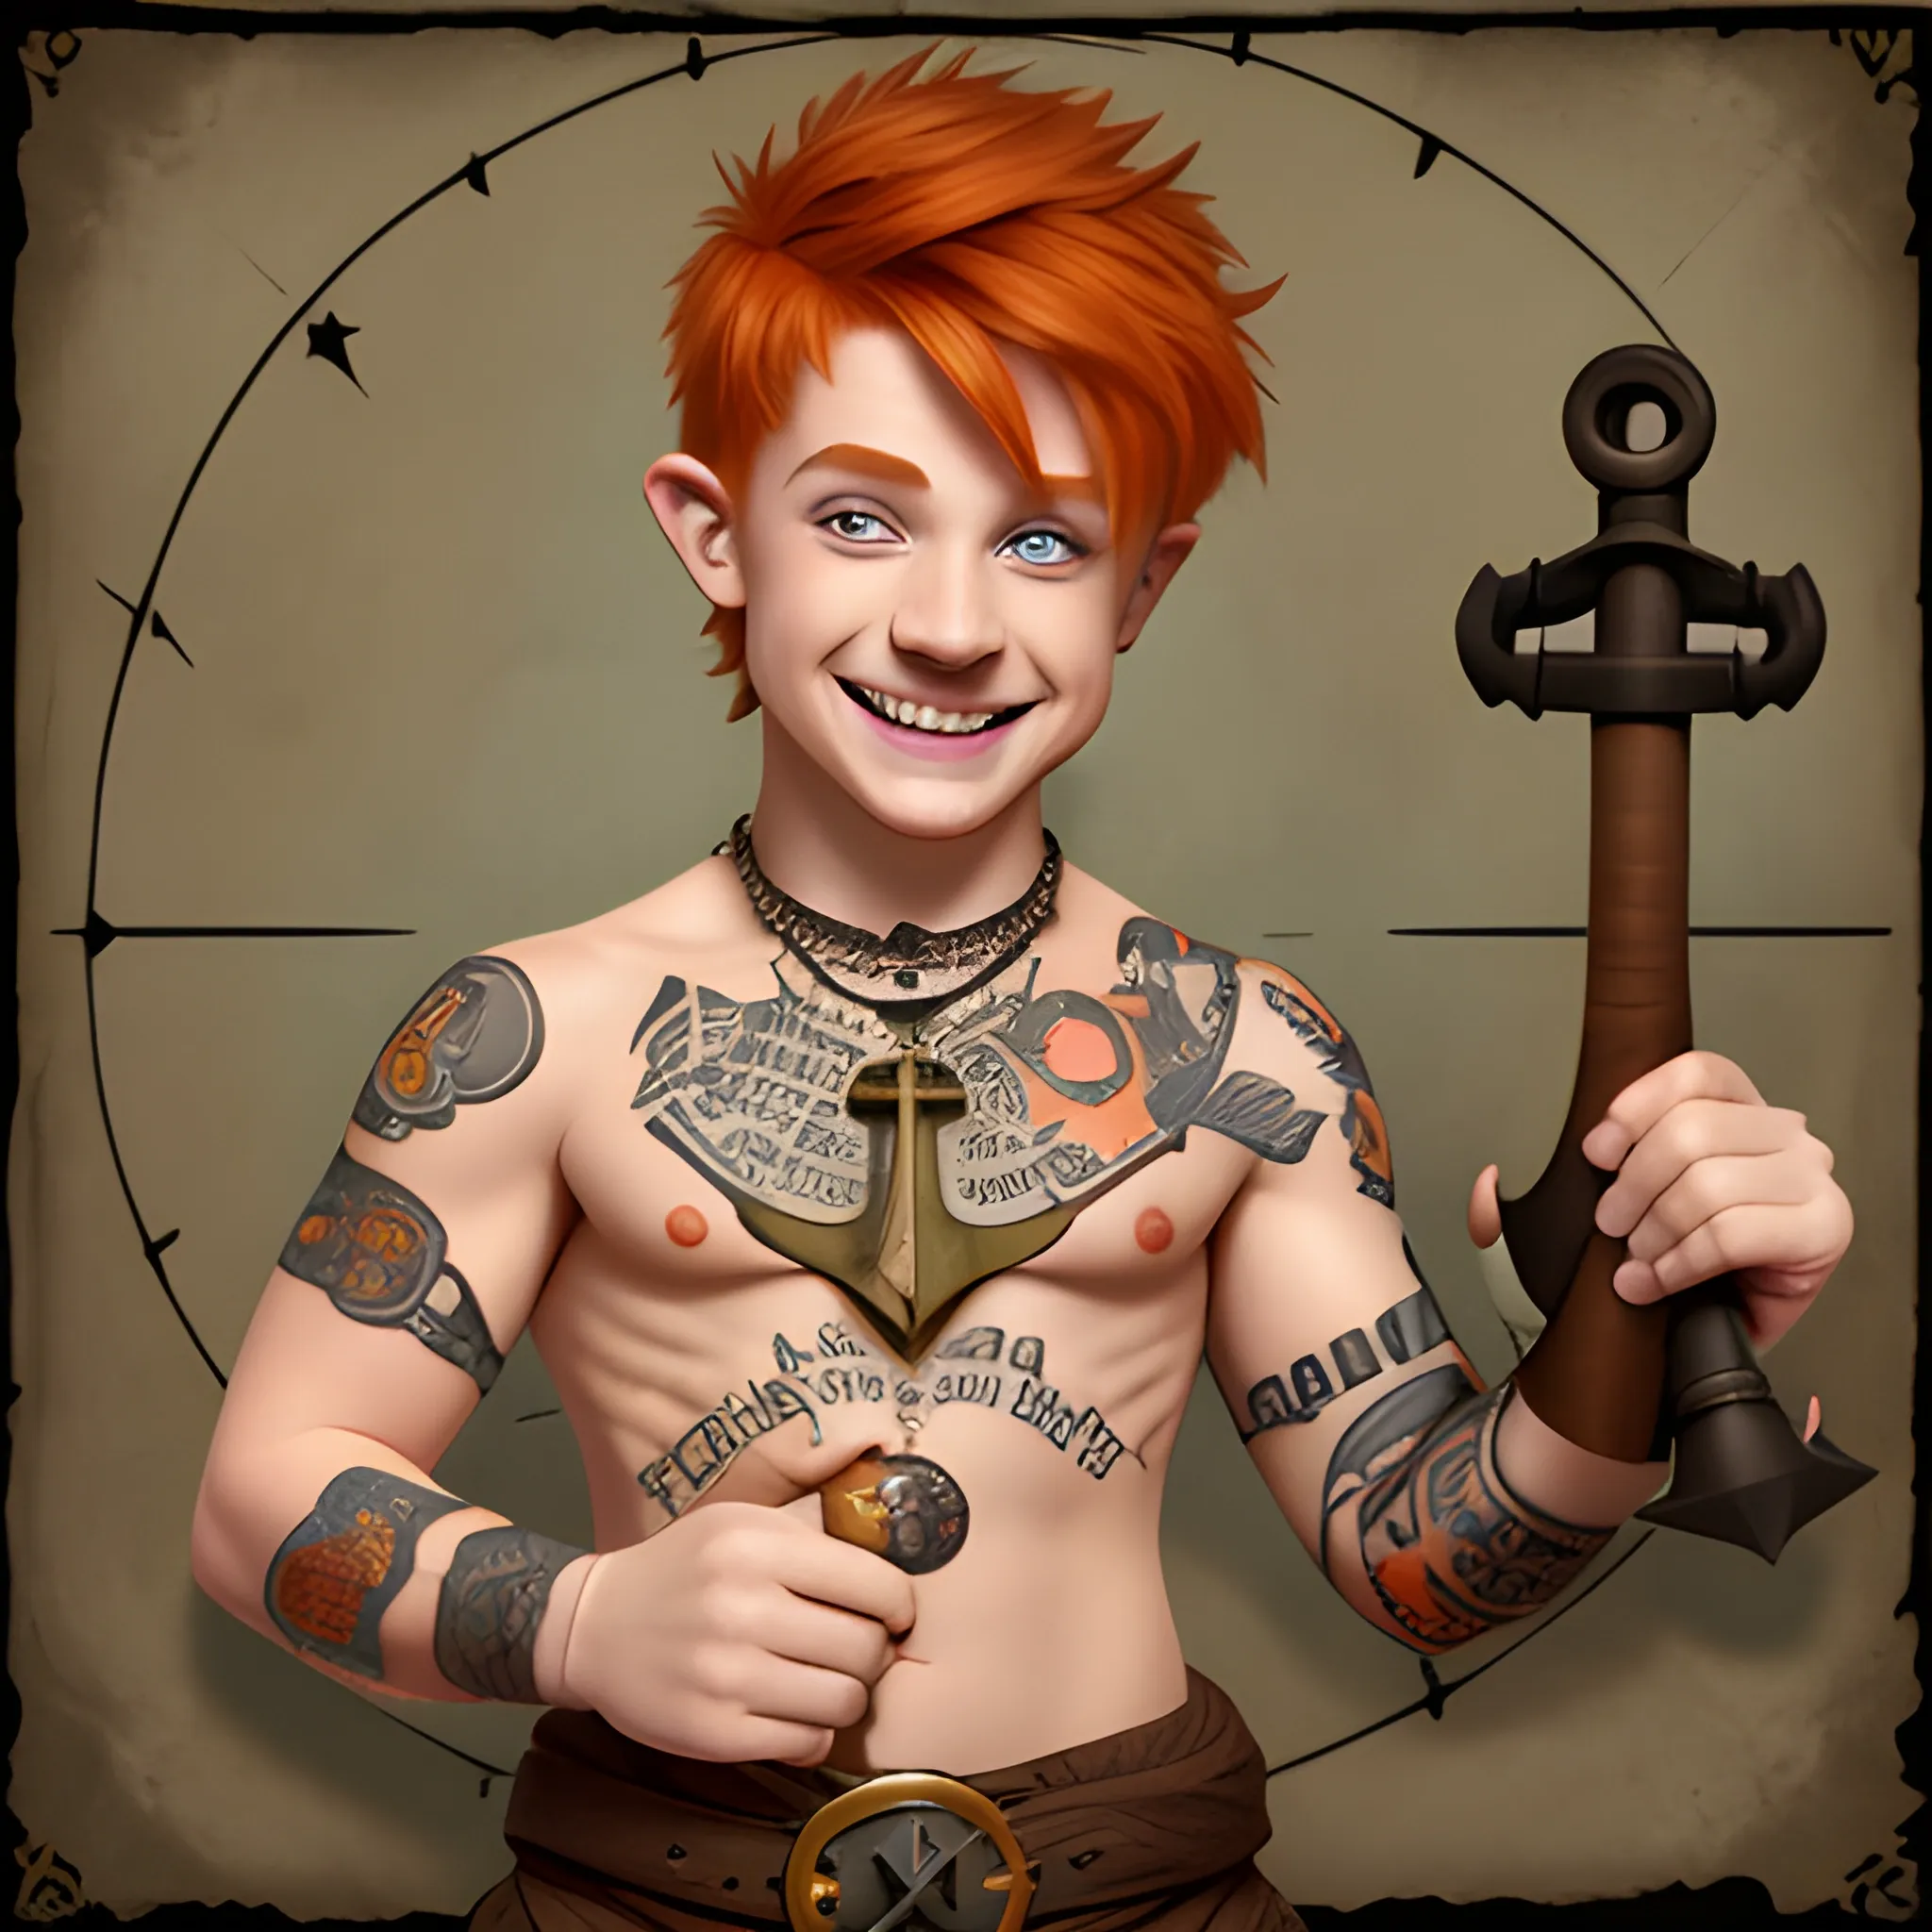 DnD male short haired halfling dark orange ginger with an anchor goatee tatoos symbolizing a map on the chest , smiling with a mugshot expression and holding a tambourine